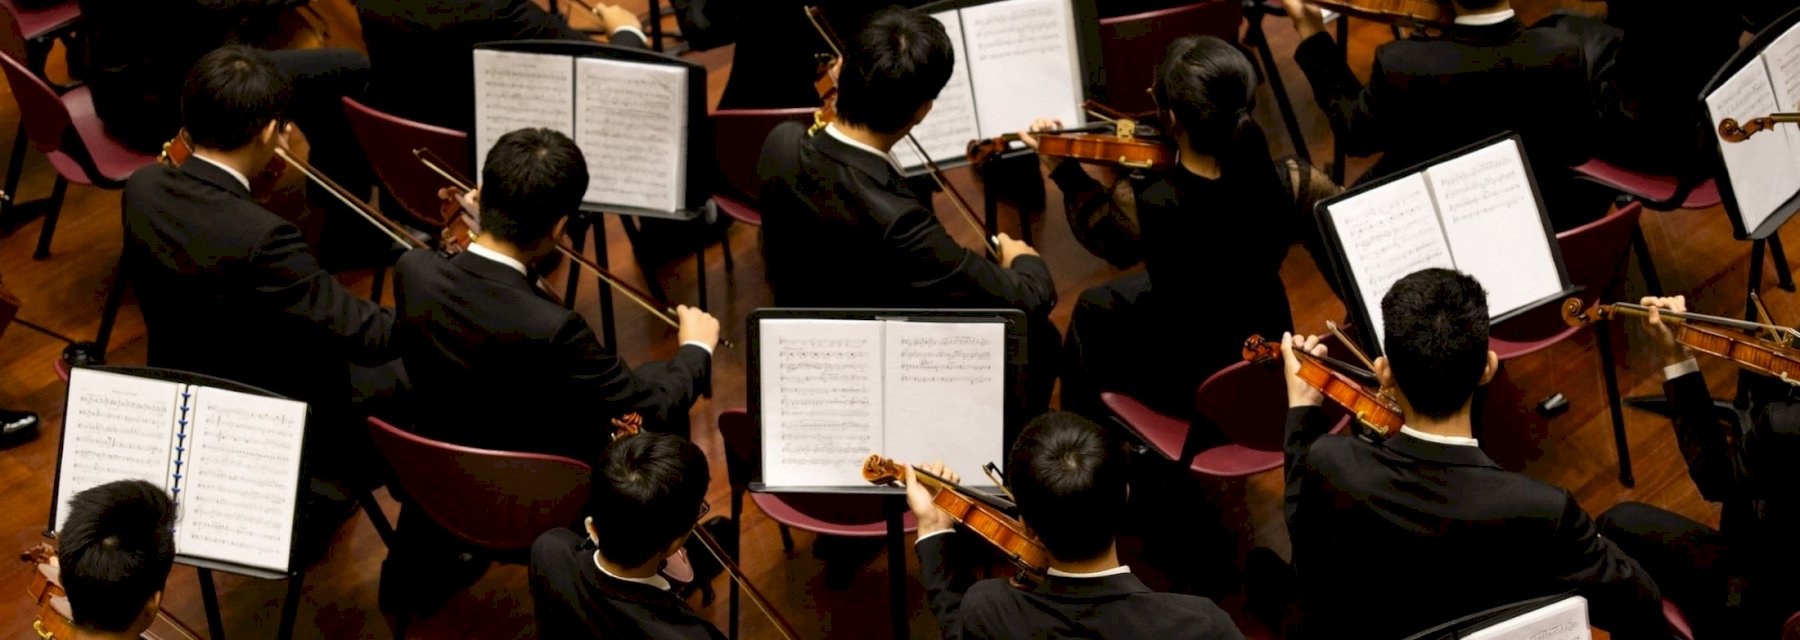 Five delightful classical concerts to enjoy in London this winter